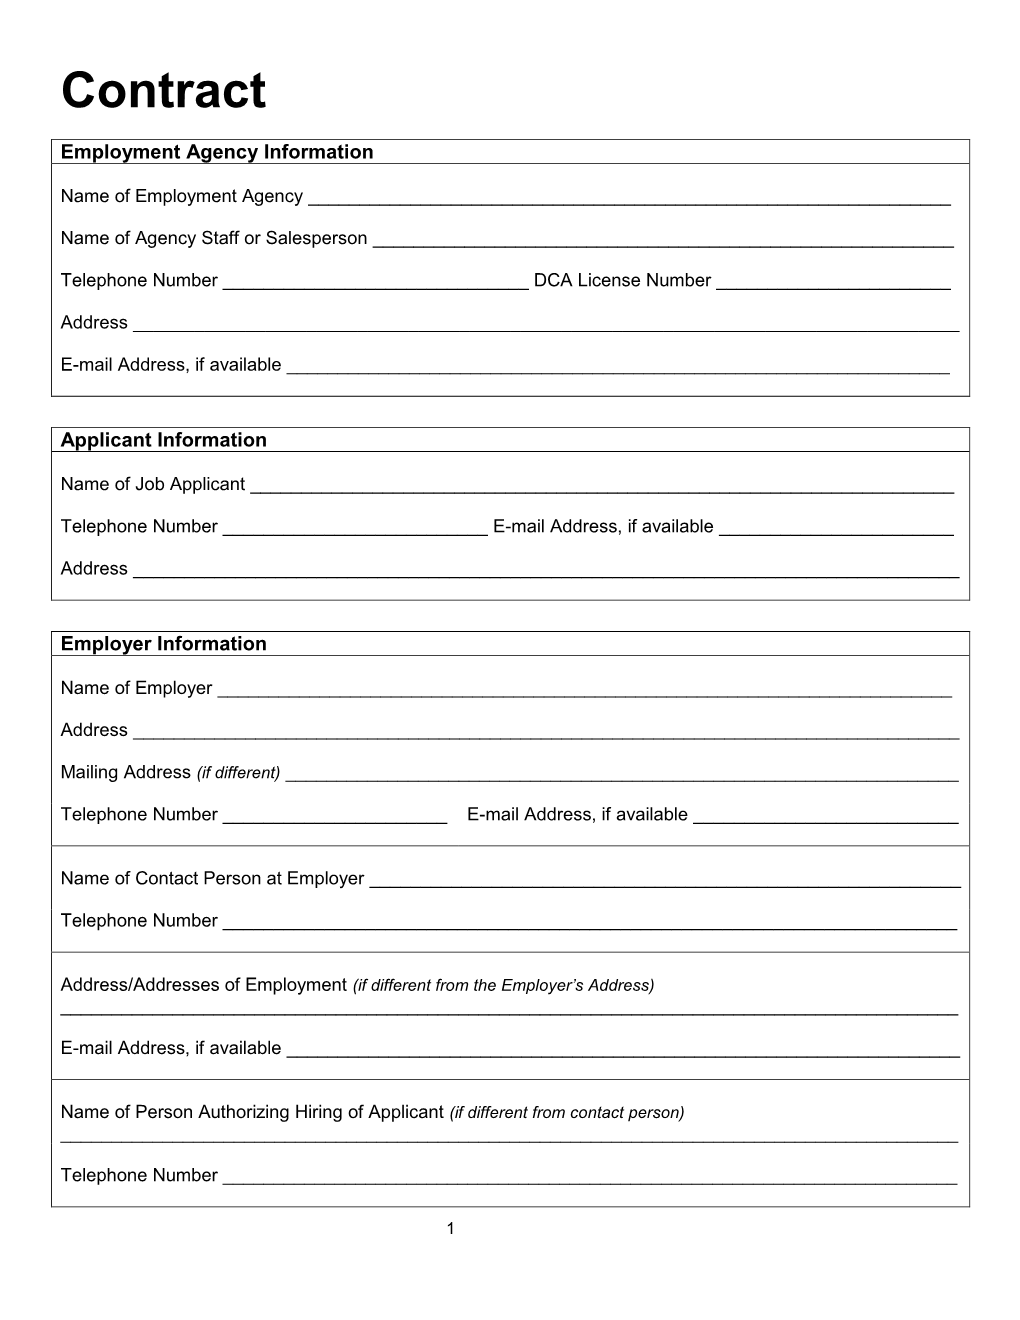 Sample Contract for Employment Agency